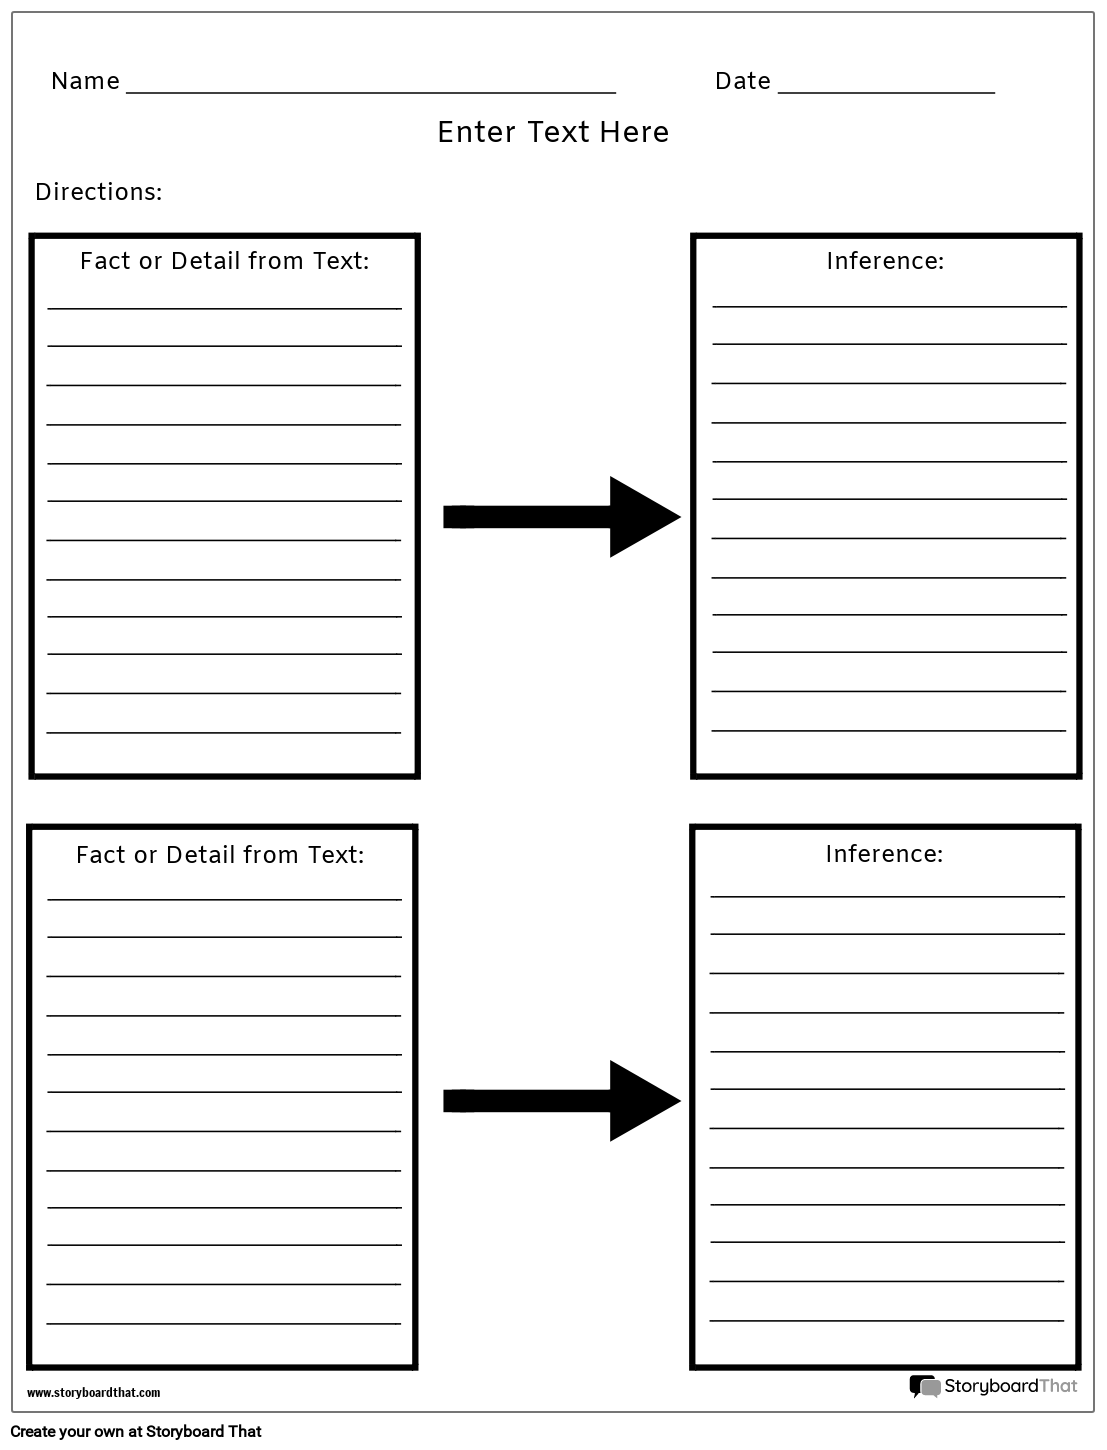 Inferencing Worksheet Template with Simple Boxes